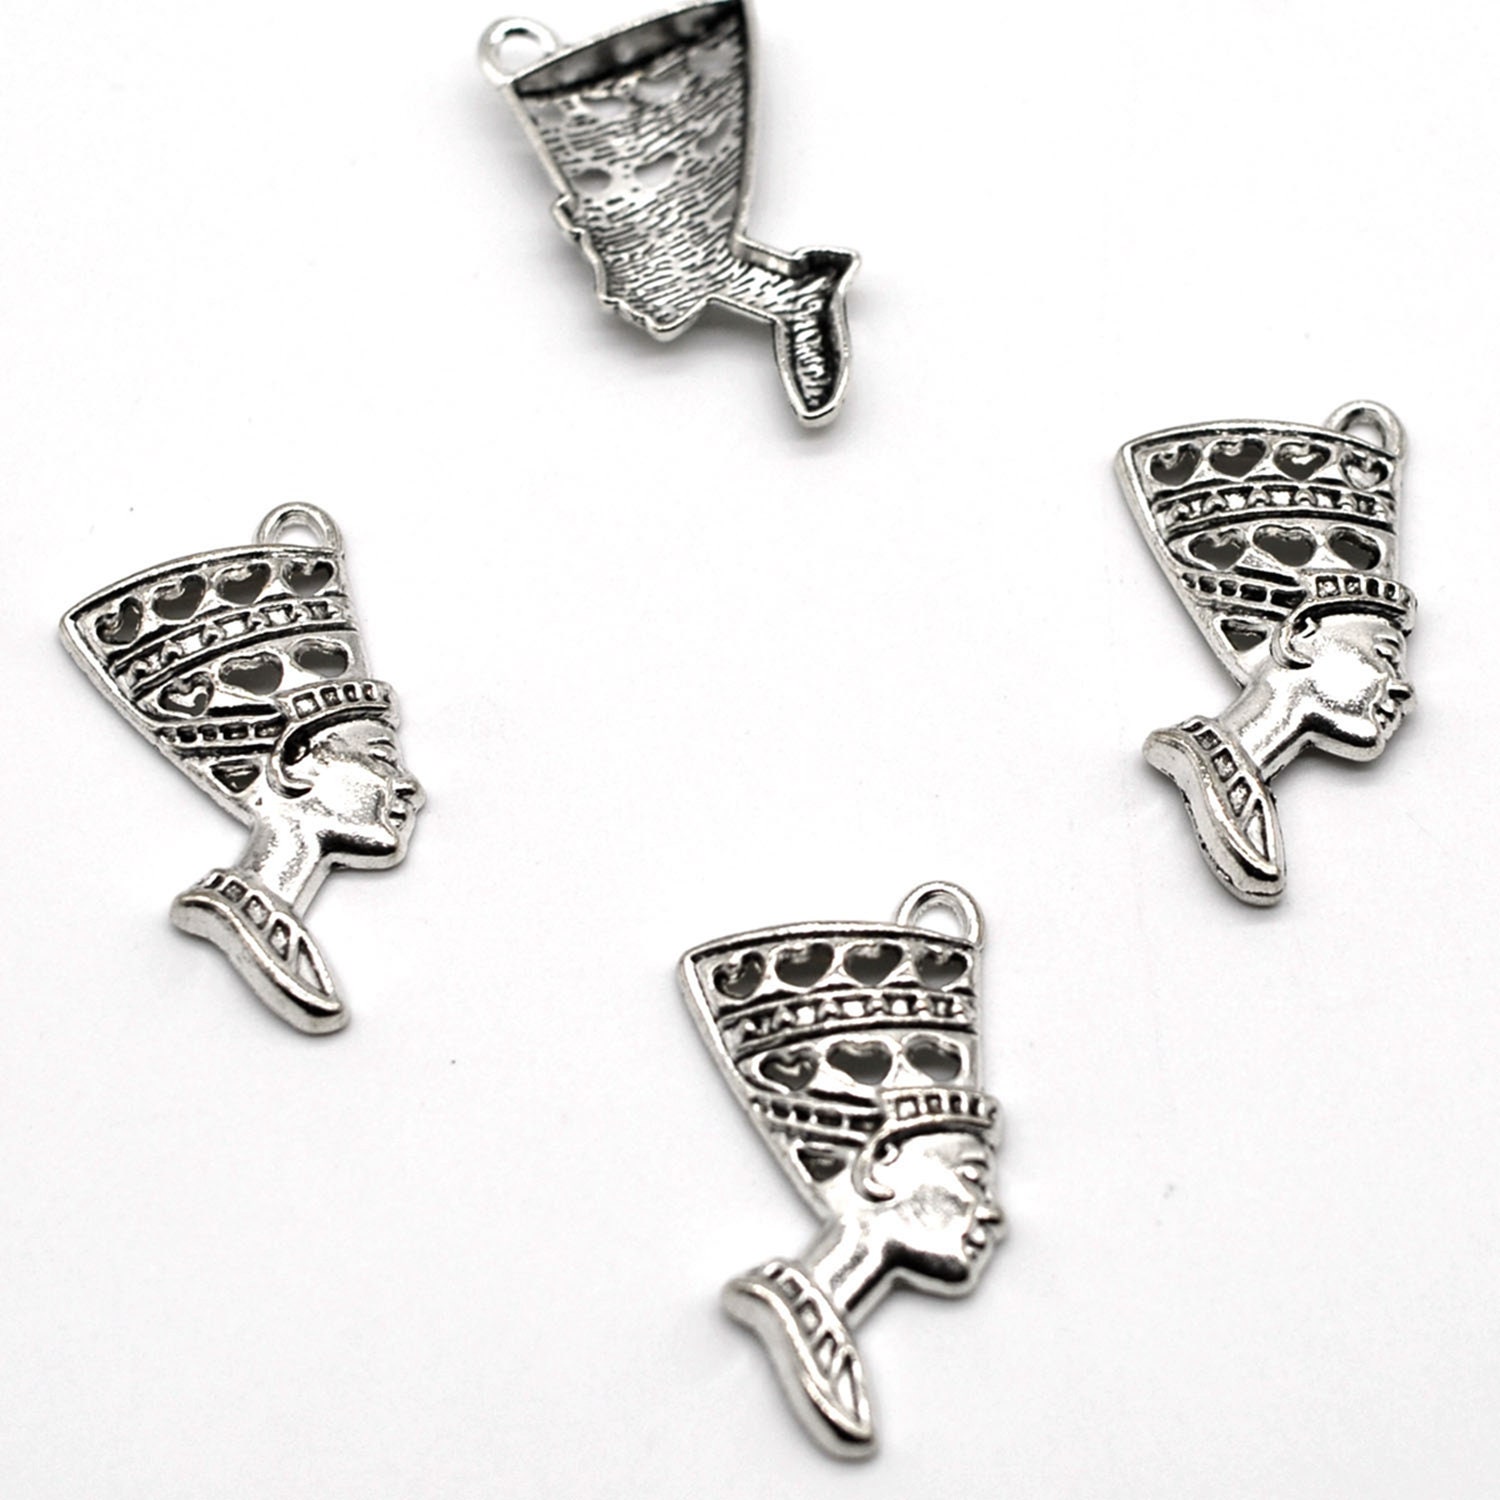 30pcs Drinking Cup Beads Charms Tibetan Silver Pendant DIY 17*22mm Wholesale